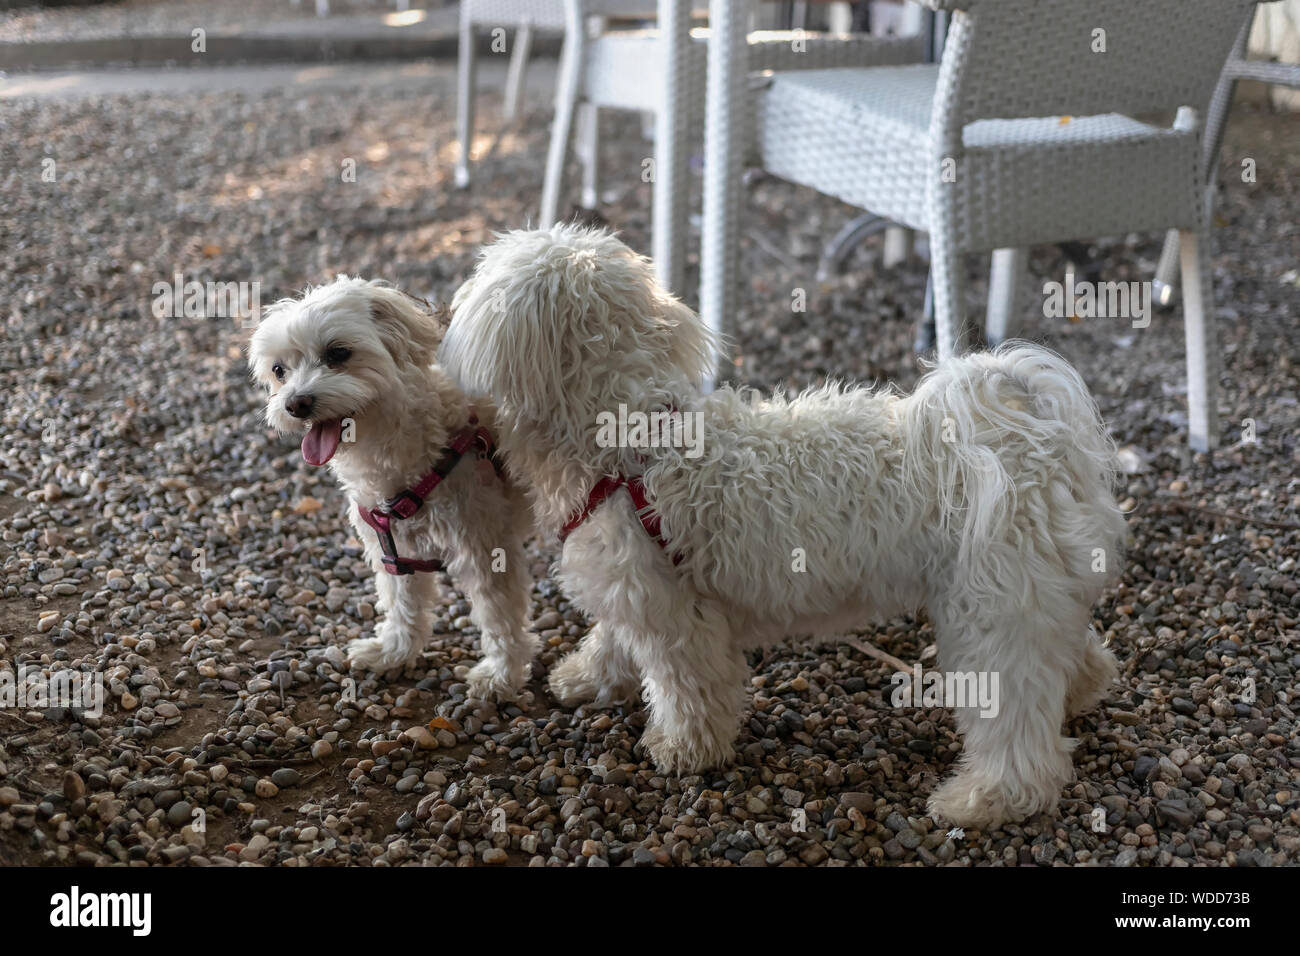 Nanja, Bichon Bolognese doggie (right), and Maltese dog Baky playing at the coffee shop terrace Stock Photo